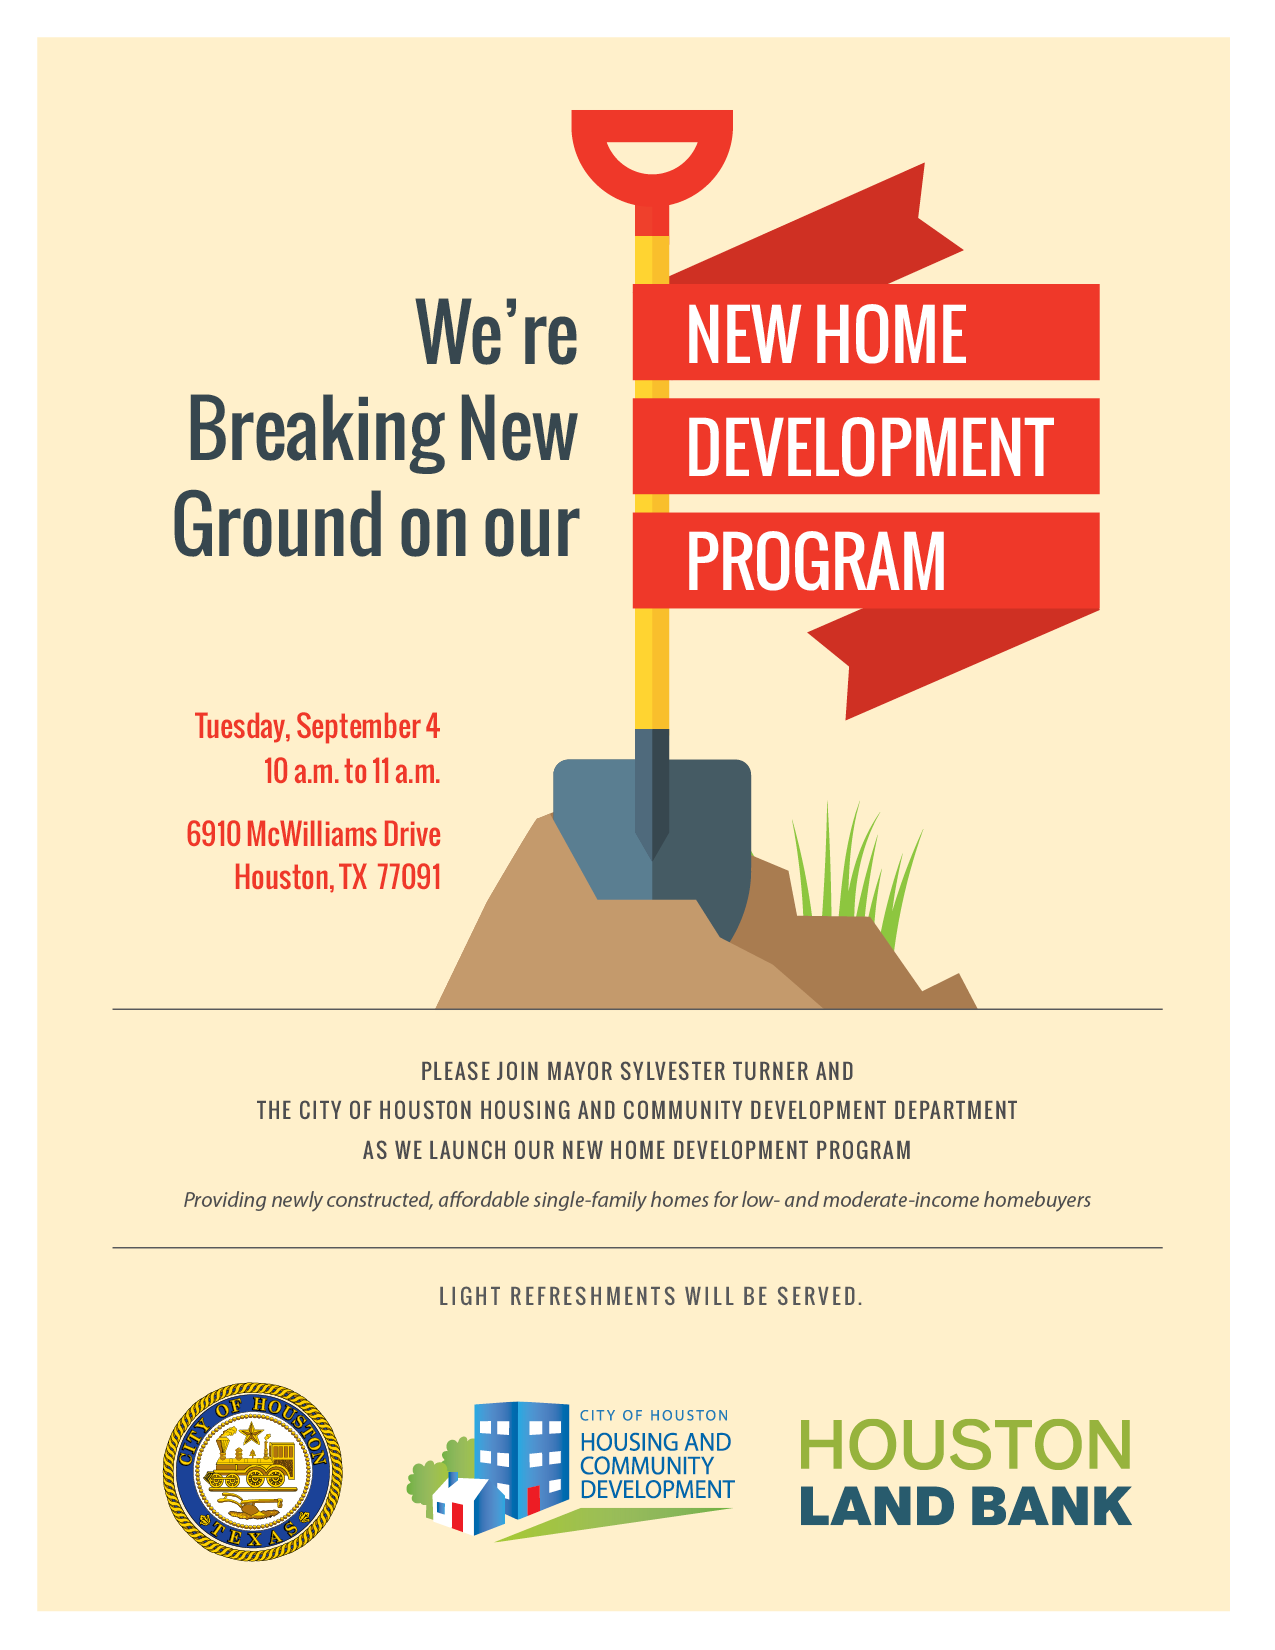 New Home Development Program Breaking ground Sept 4th at 10:00 a.m.